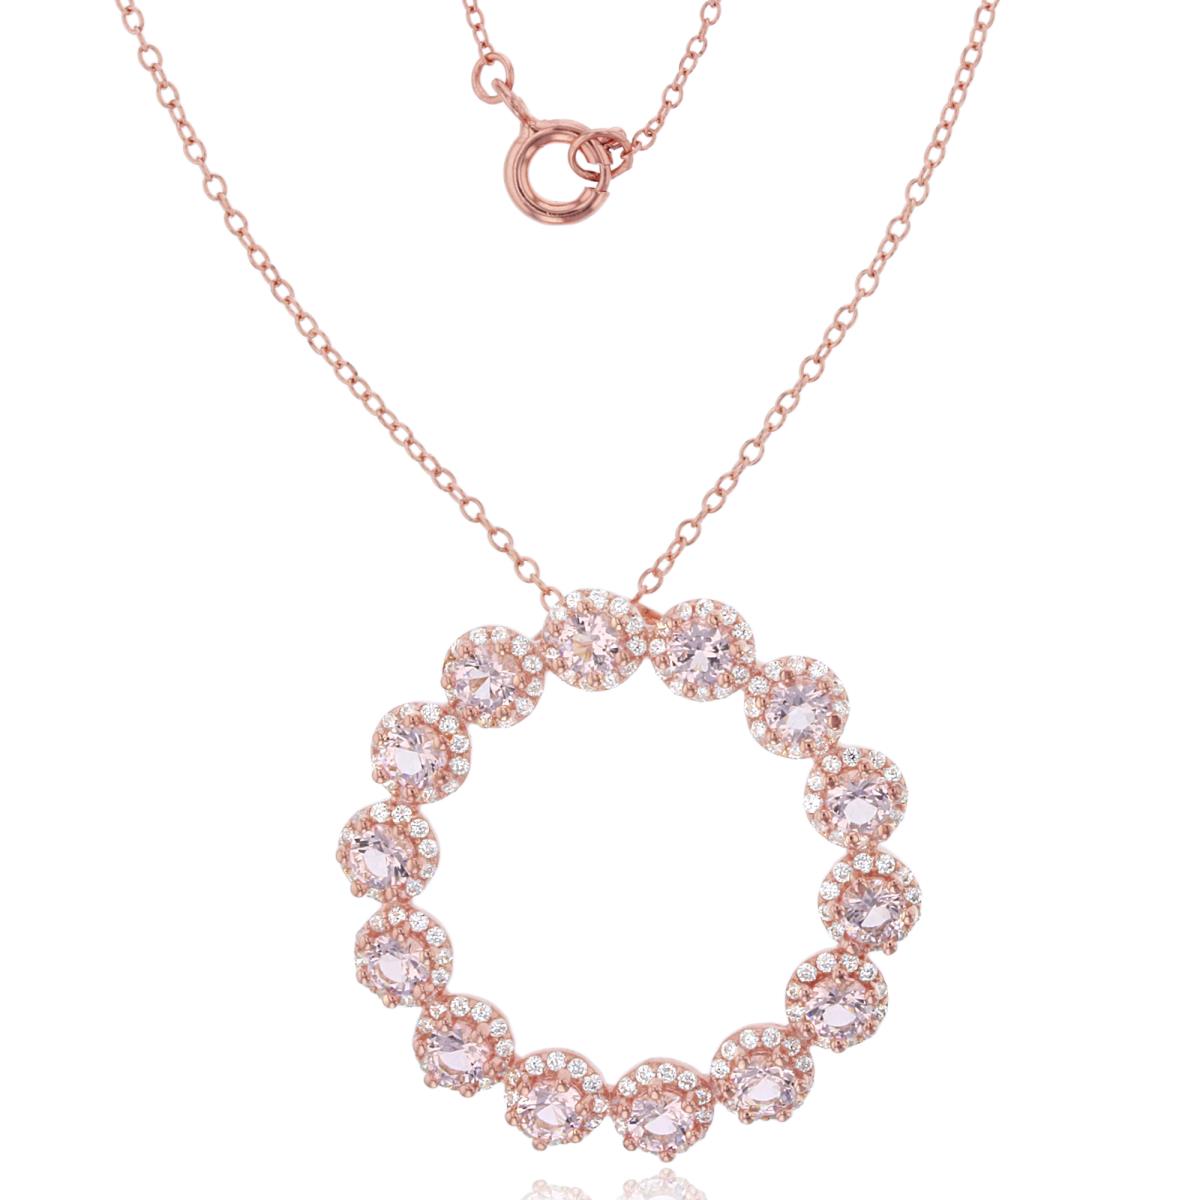 Sterling Silver+1Micron Rose Gold Rnd White & Morganite Nano 14-Clusters Open Circle 18"Necklace